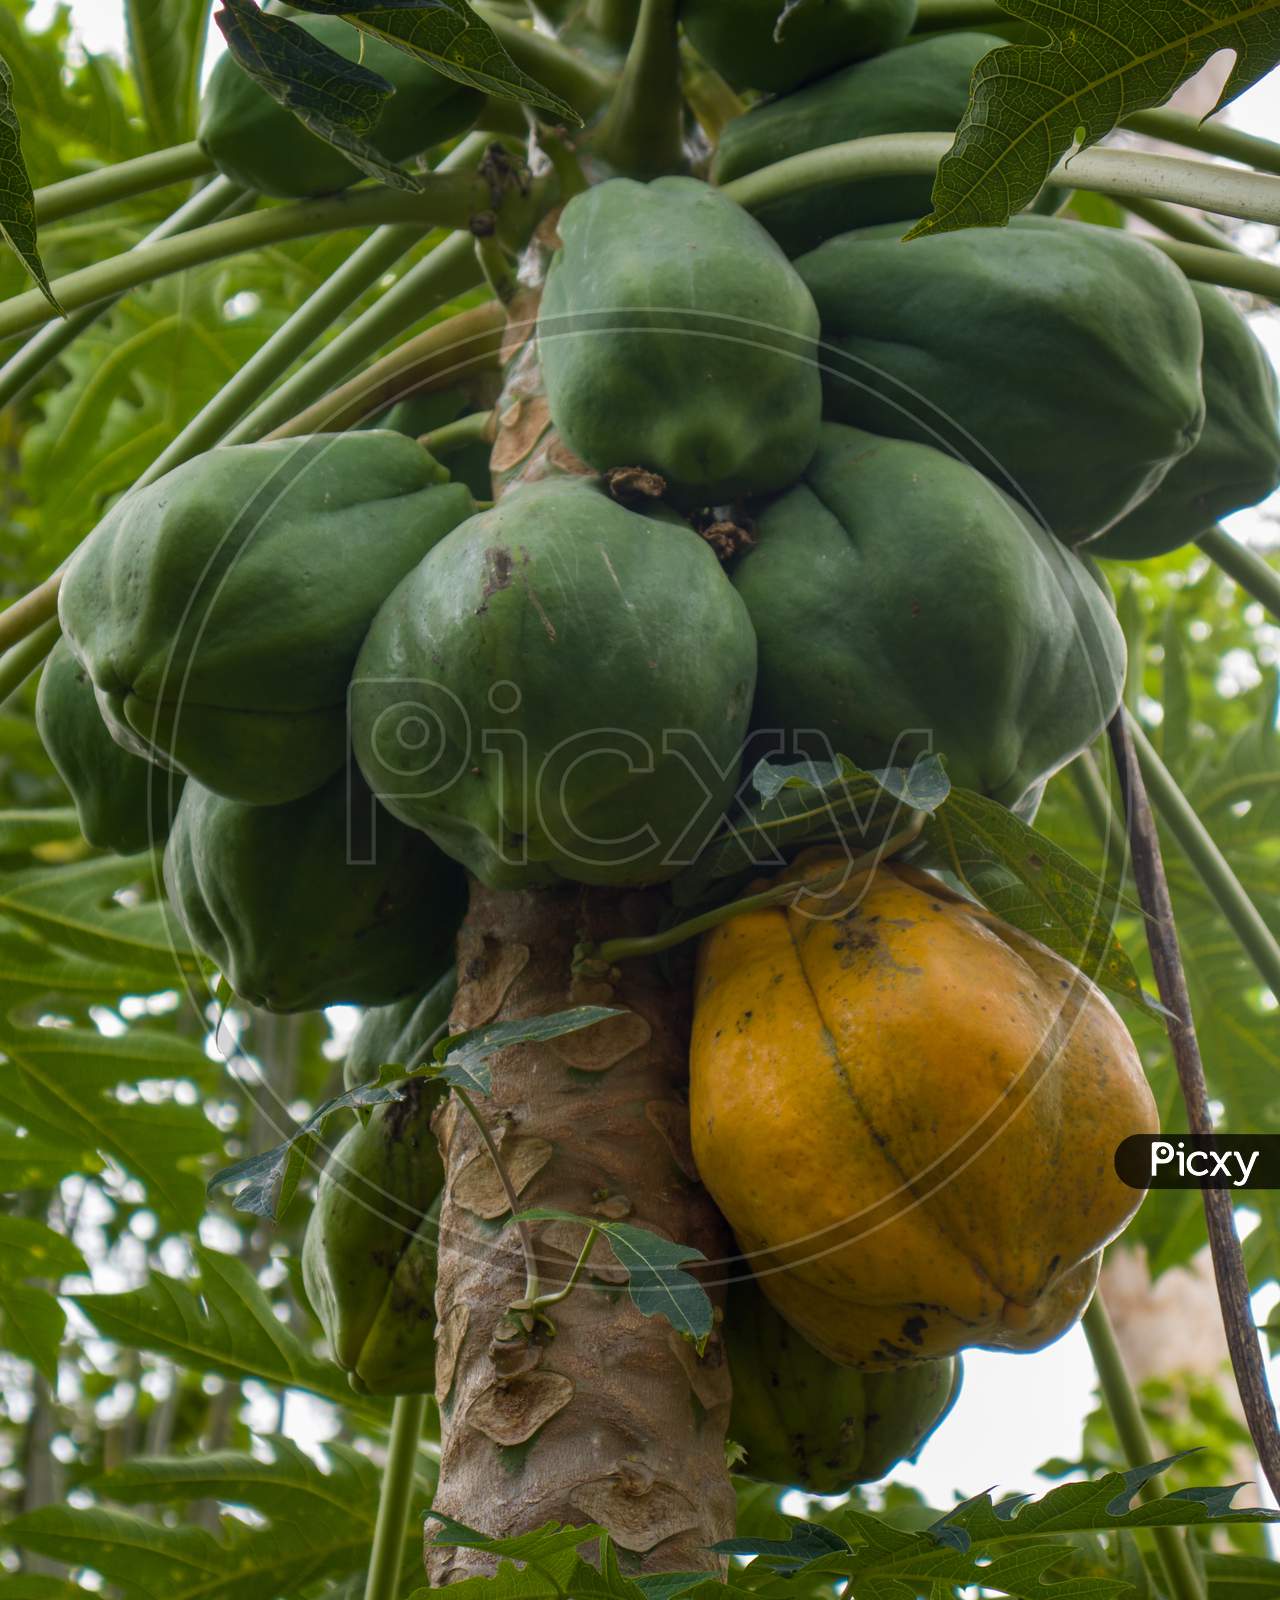 Bunch of papayas hanging on the plant